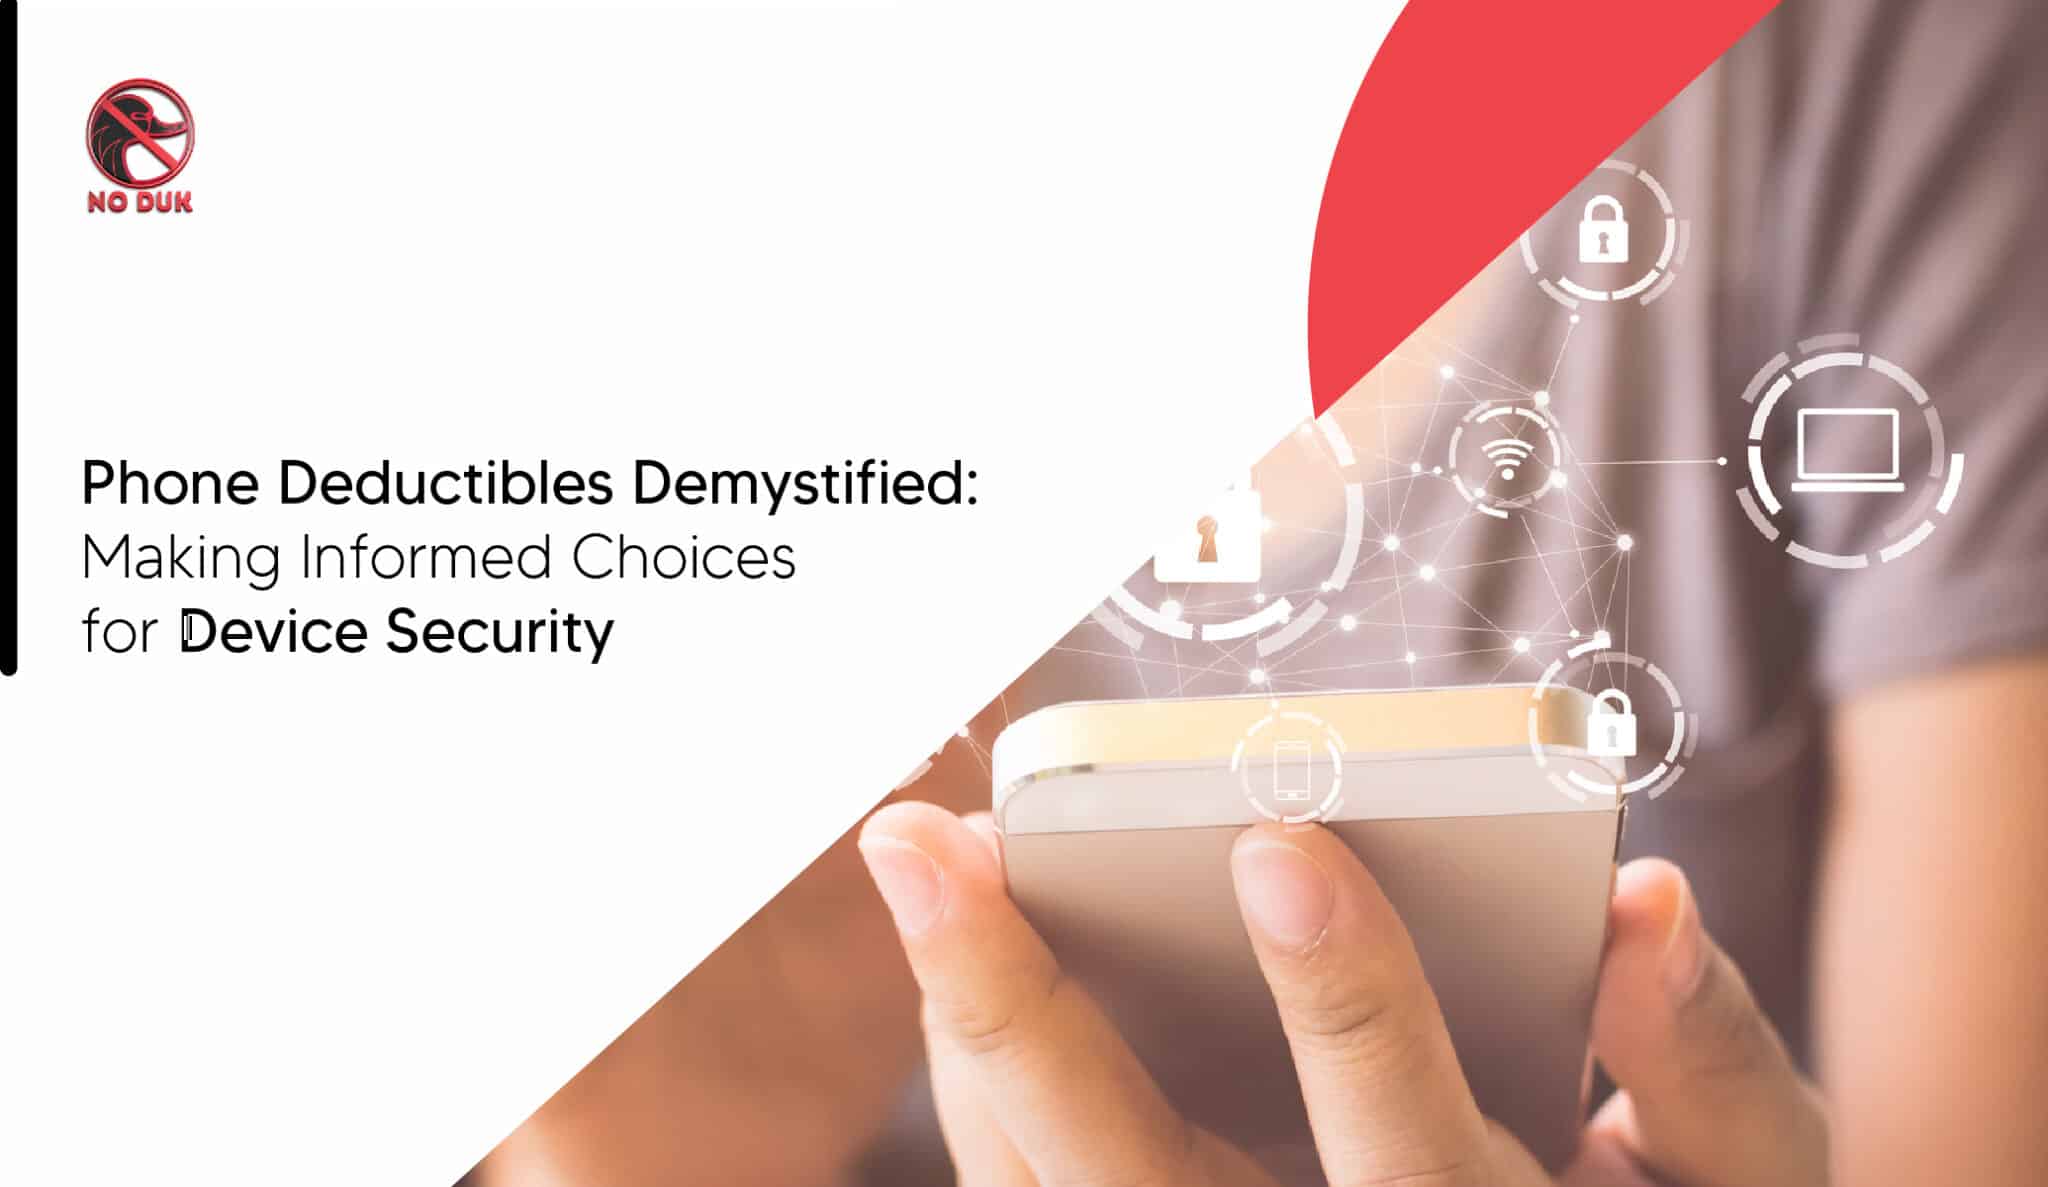 Phone deductible demystified : Device security by Noduk